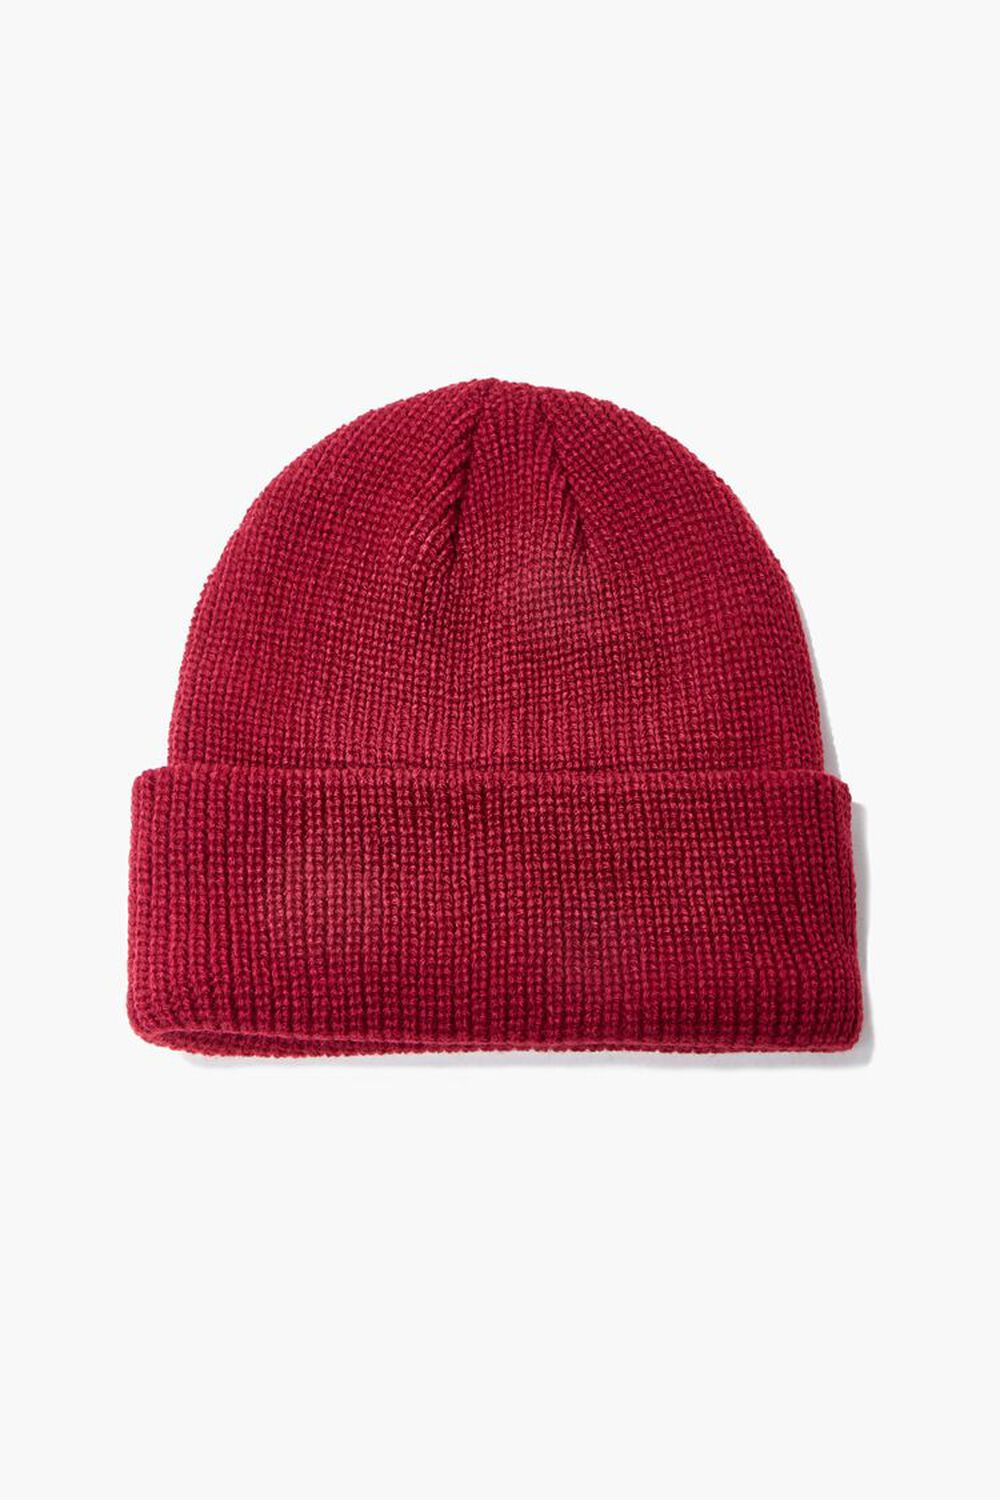 RED Kids Ribbed Knit Beanie (Girls + Boys), image 1